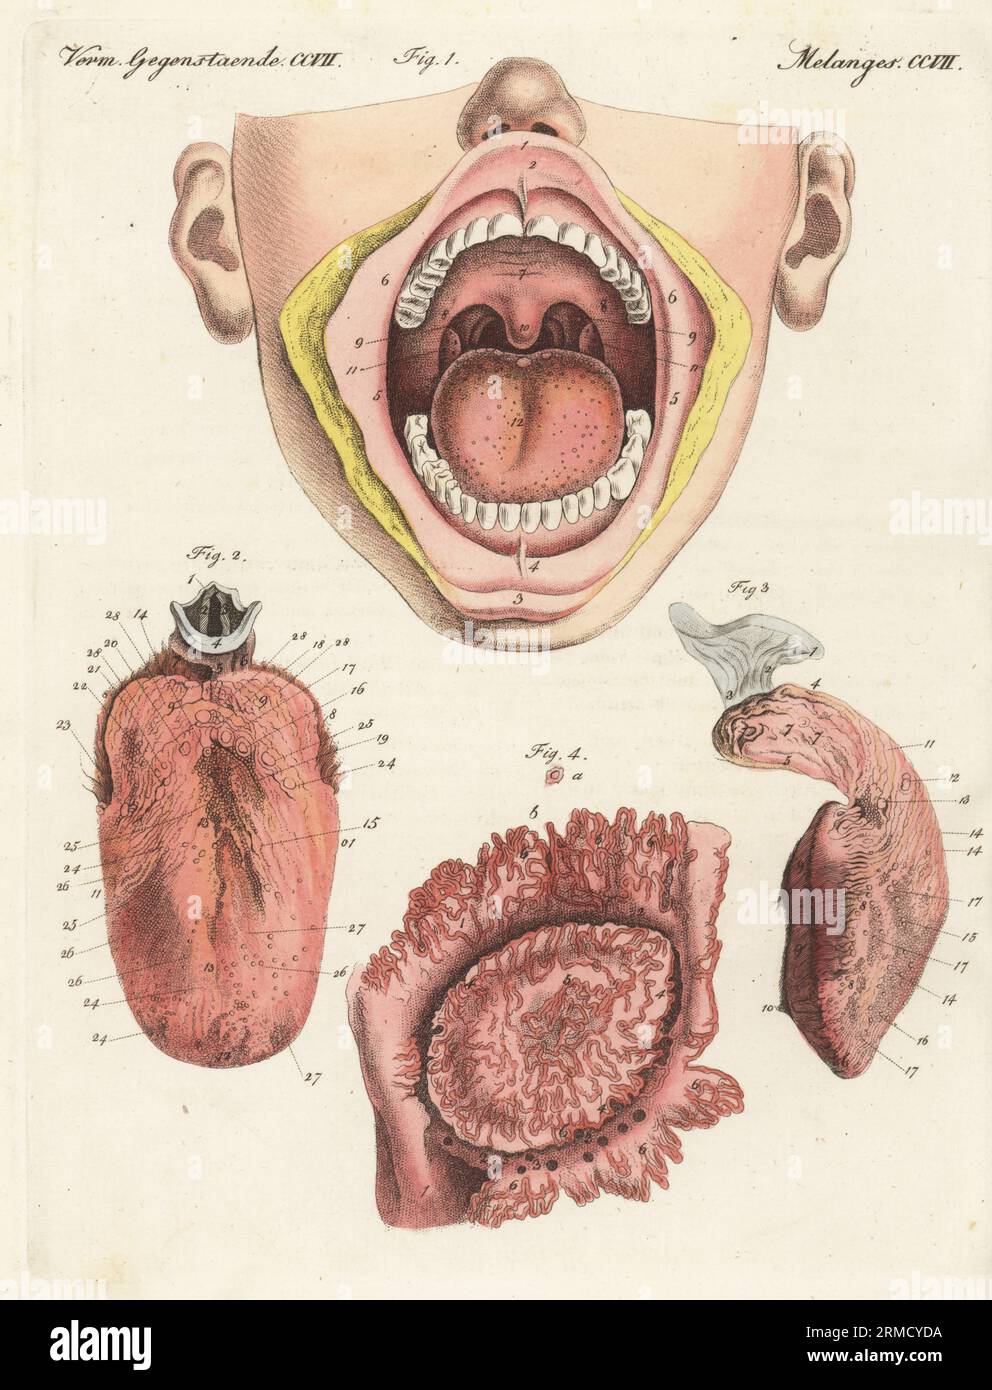 Anatomy of the human sense of taste. Mouth cavity with lips, palate, teeth, uvula, tongue 1, tongue and epiglottis 2, right side of the tongue 3, and taste bud magnified 4. Der Geschmack, le gout. Handcoloured copperplate engraving from Carl Bertuch's Bilderbuch fur Kinder (Picture Book for Children), Weimar, 1815. A 12-volume encyclopedia for children illustrated with almost 1,200 engraved plates on natural history, science, costume, mythology, etc., published from 1790-1830. Stock Photo